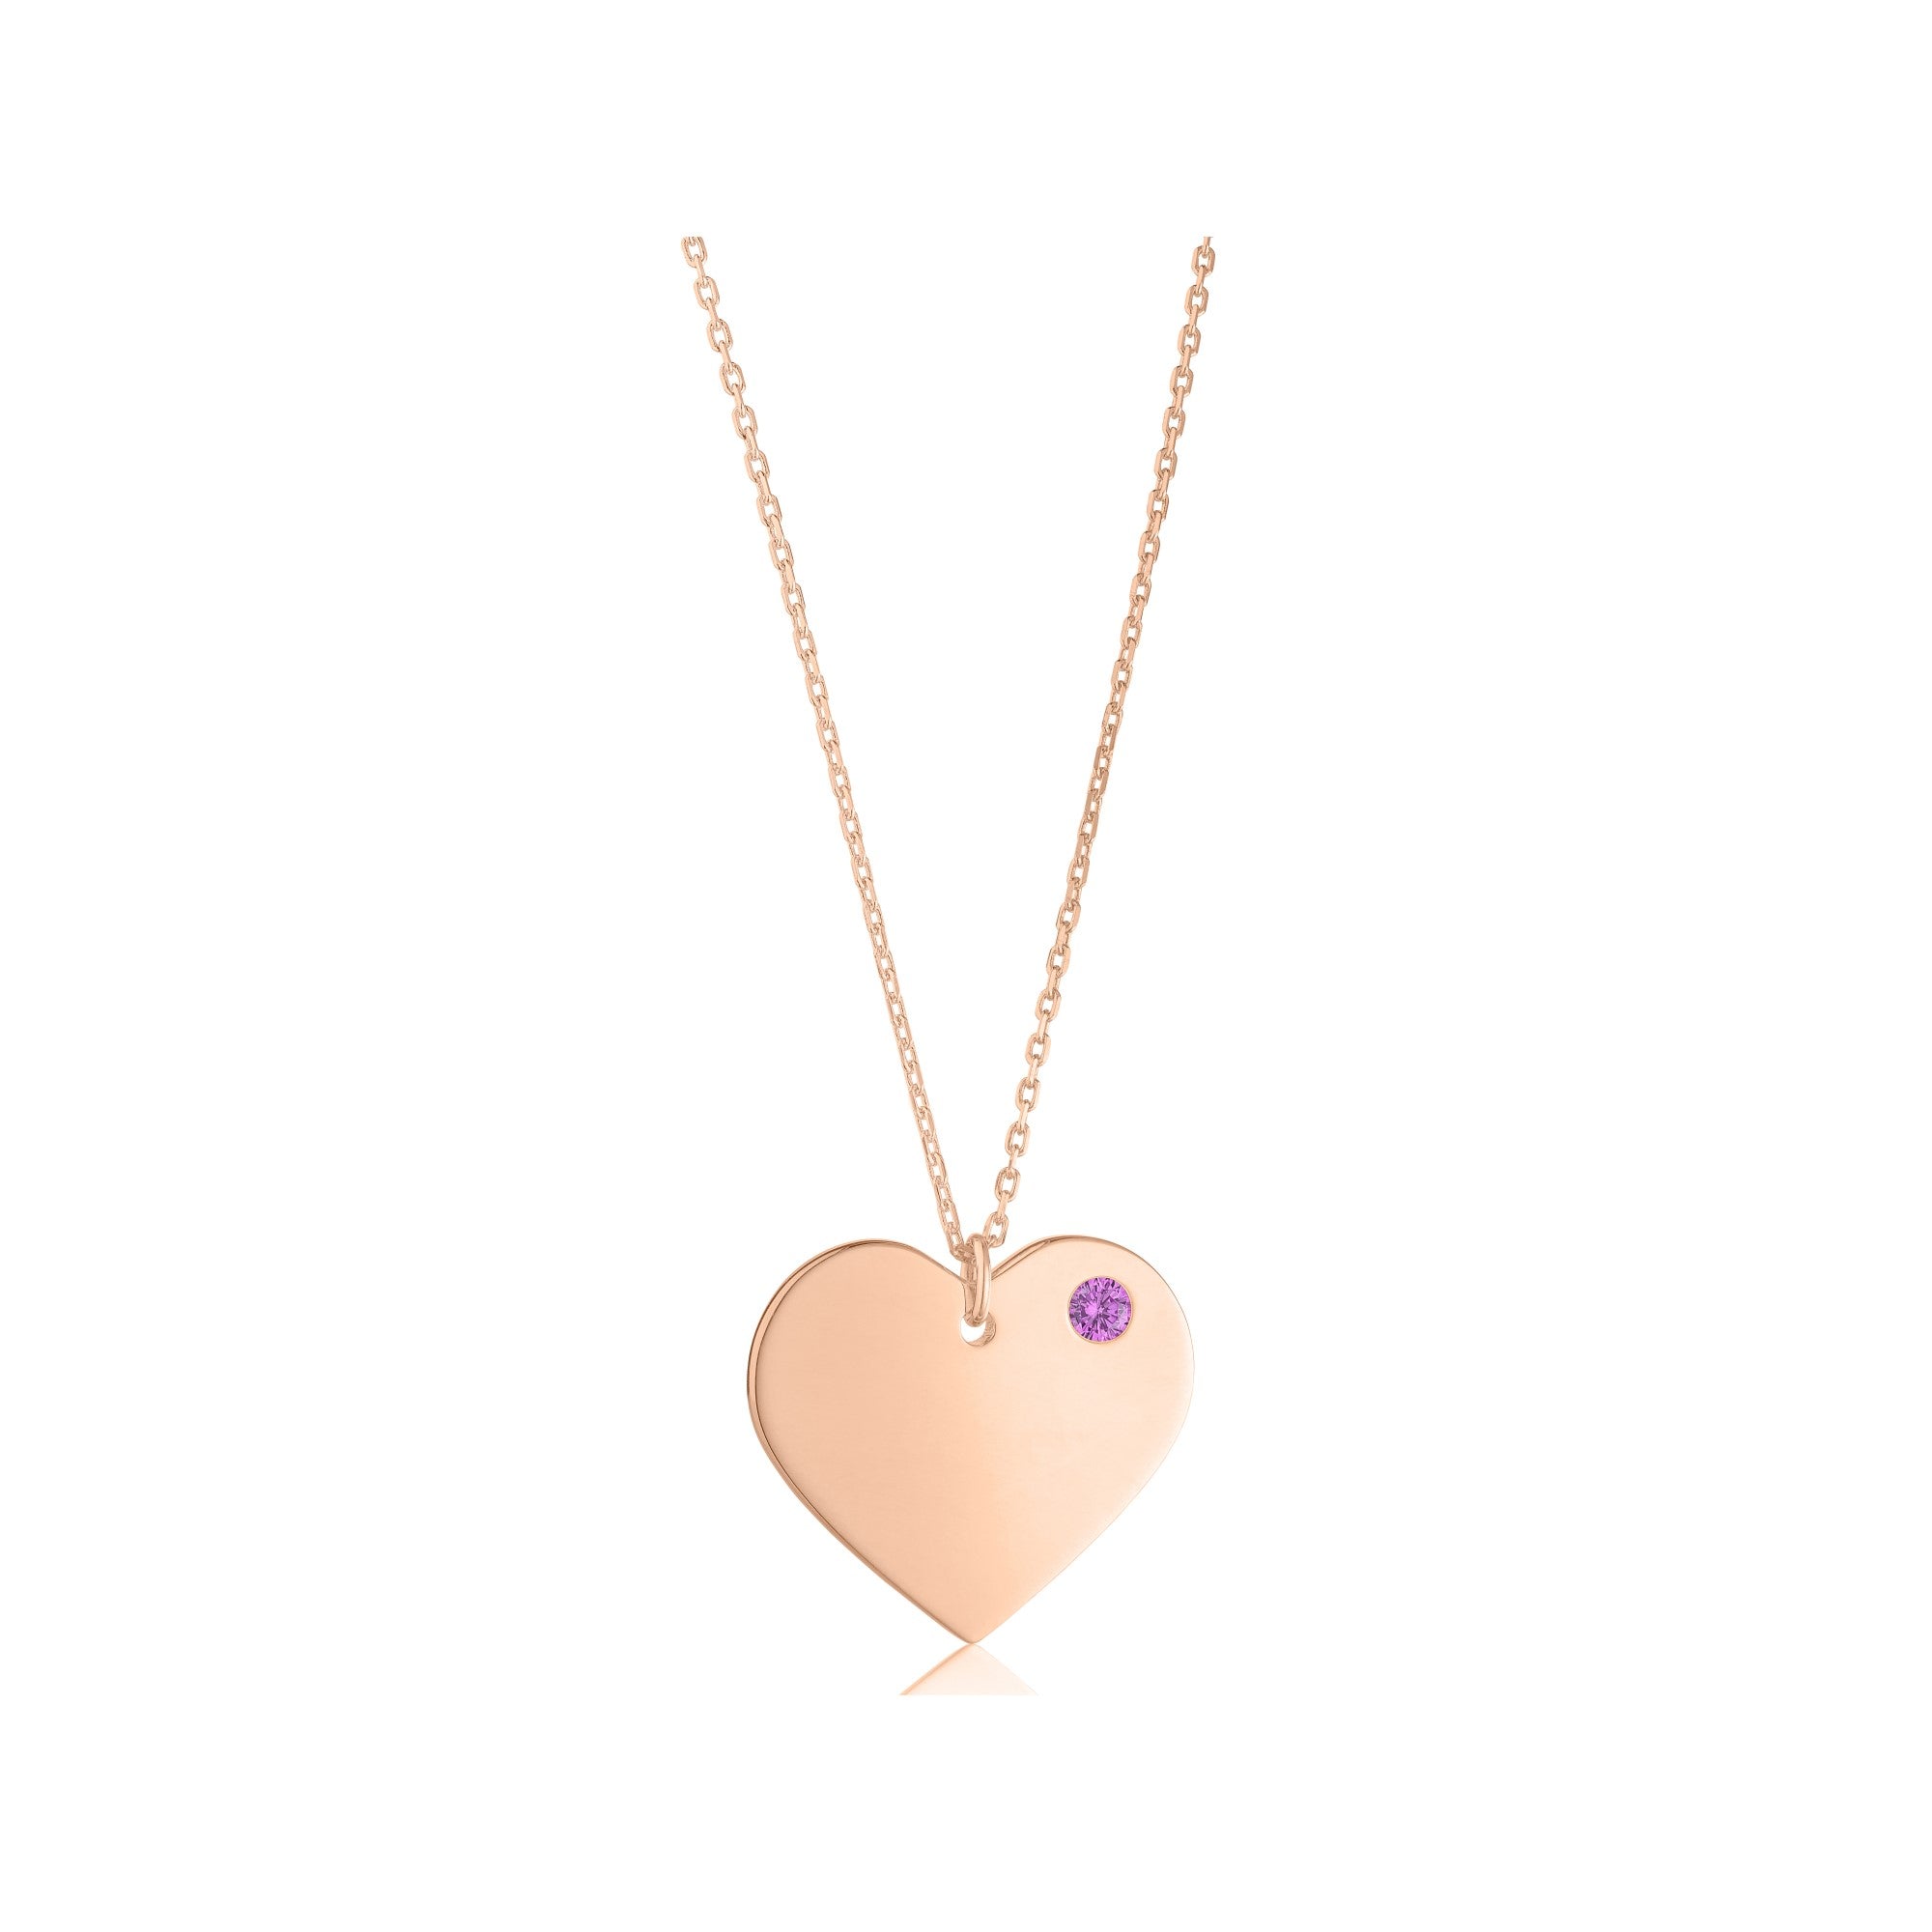 MASSETE Sterling Silver 925 Rose Gold Plated Personalized Engraved Heart Necklace with Simulated Birthstone Custom Engravable Pendant for Women and Girls